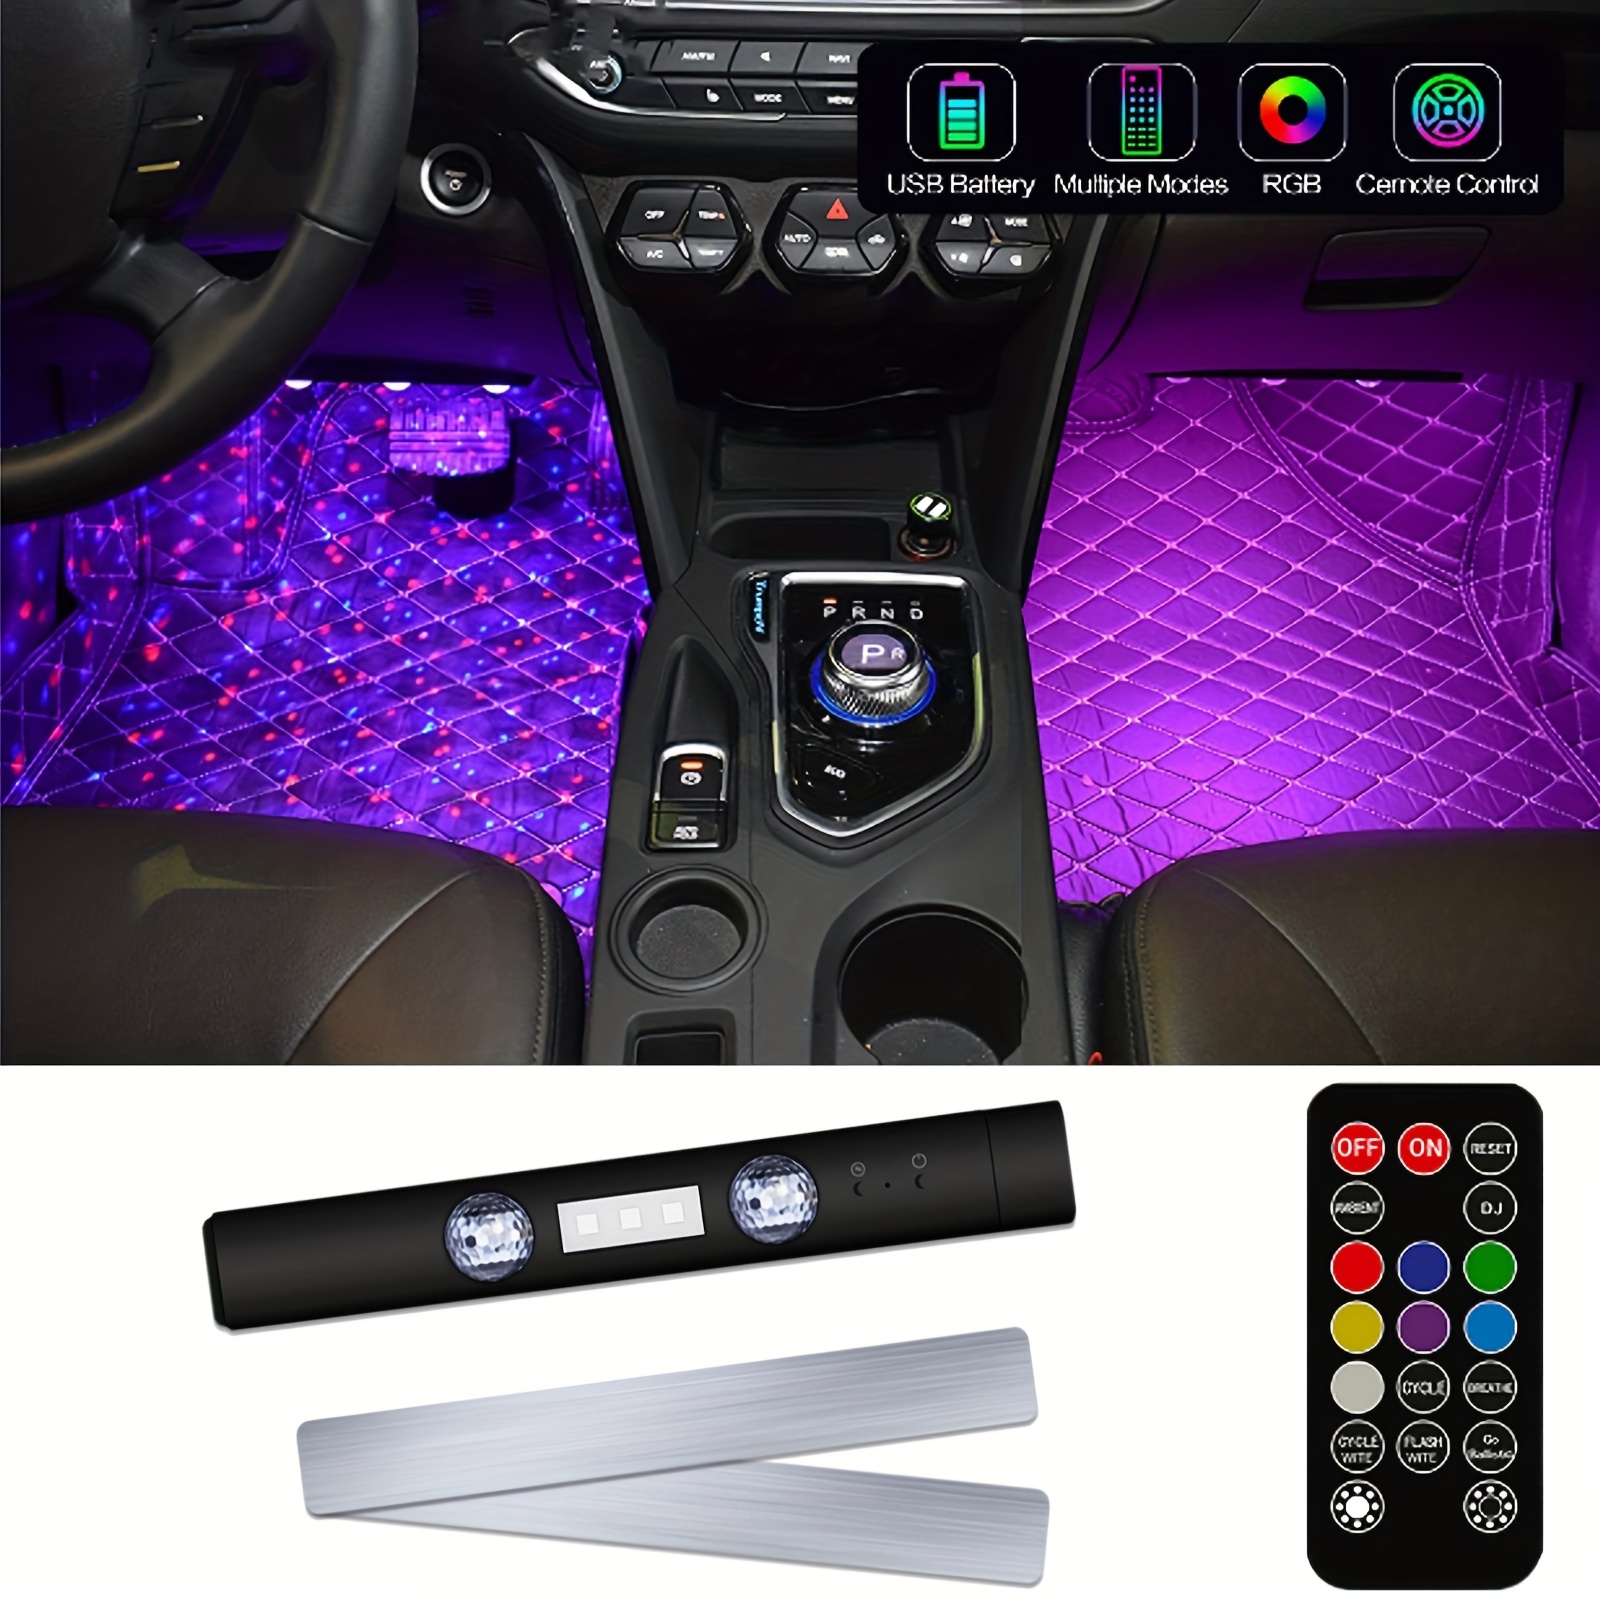 LED Lights For Car, USB Charge Car Interior Neon Lights RGB LED Starry  Atmosphere Light Sound Remote Control Roof Under Decoration For Car